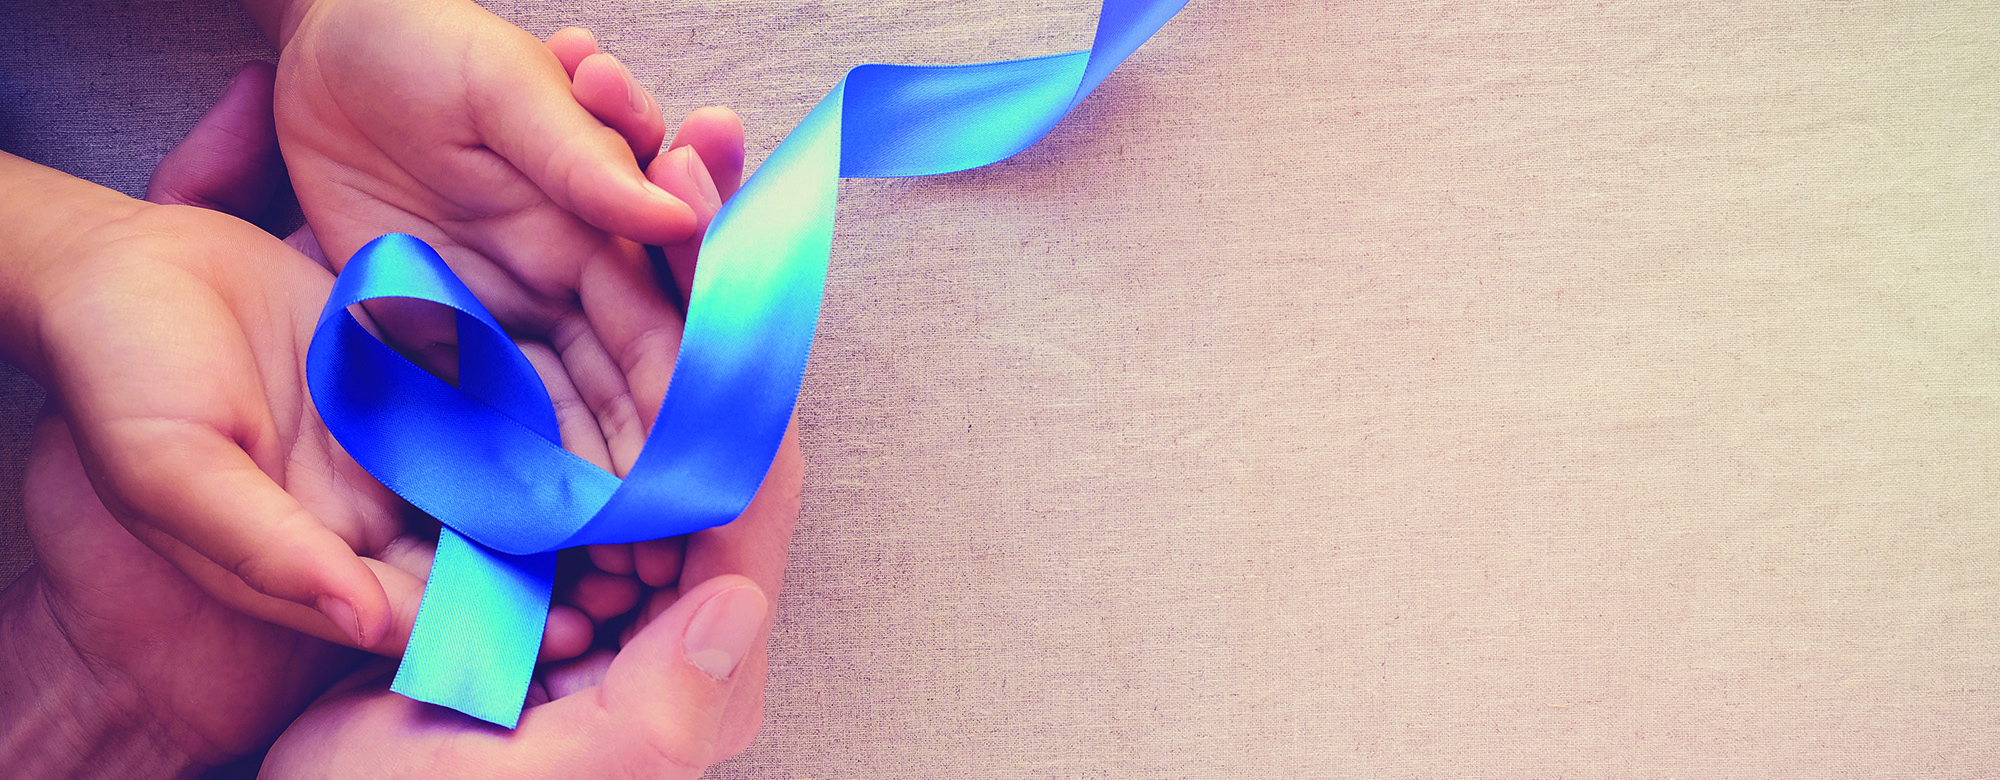 adult and child hands holding Blue ribbon, Colon Cancer, Colorectal Cancer, Child Abuse awareness, world diabetes day